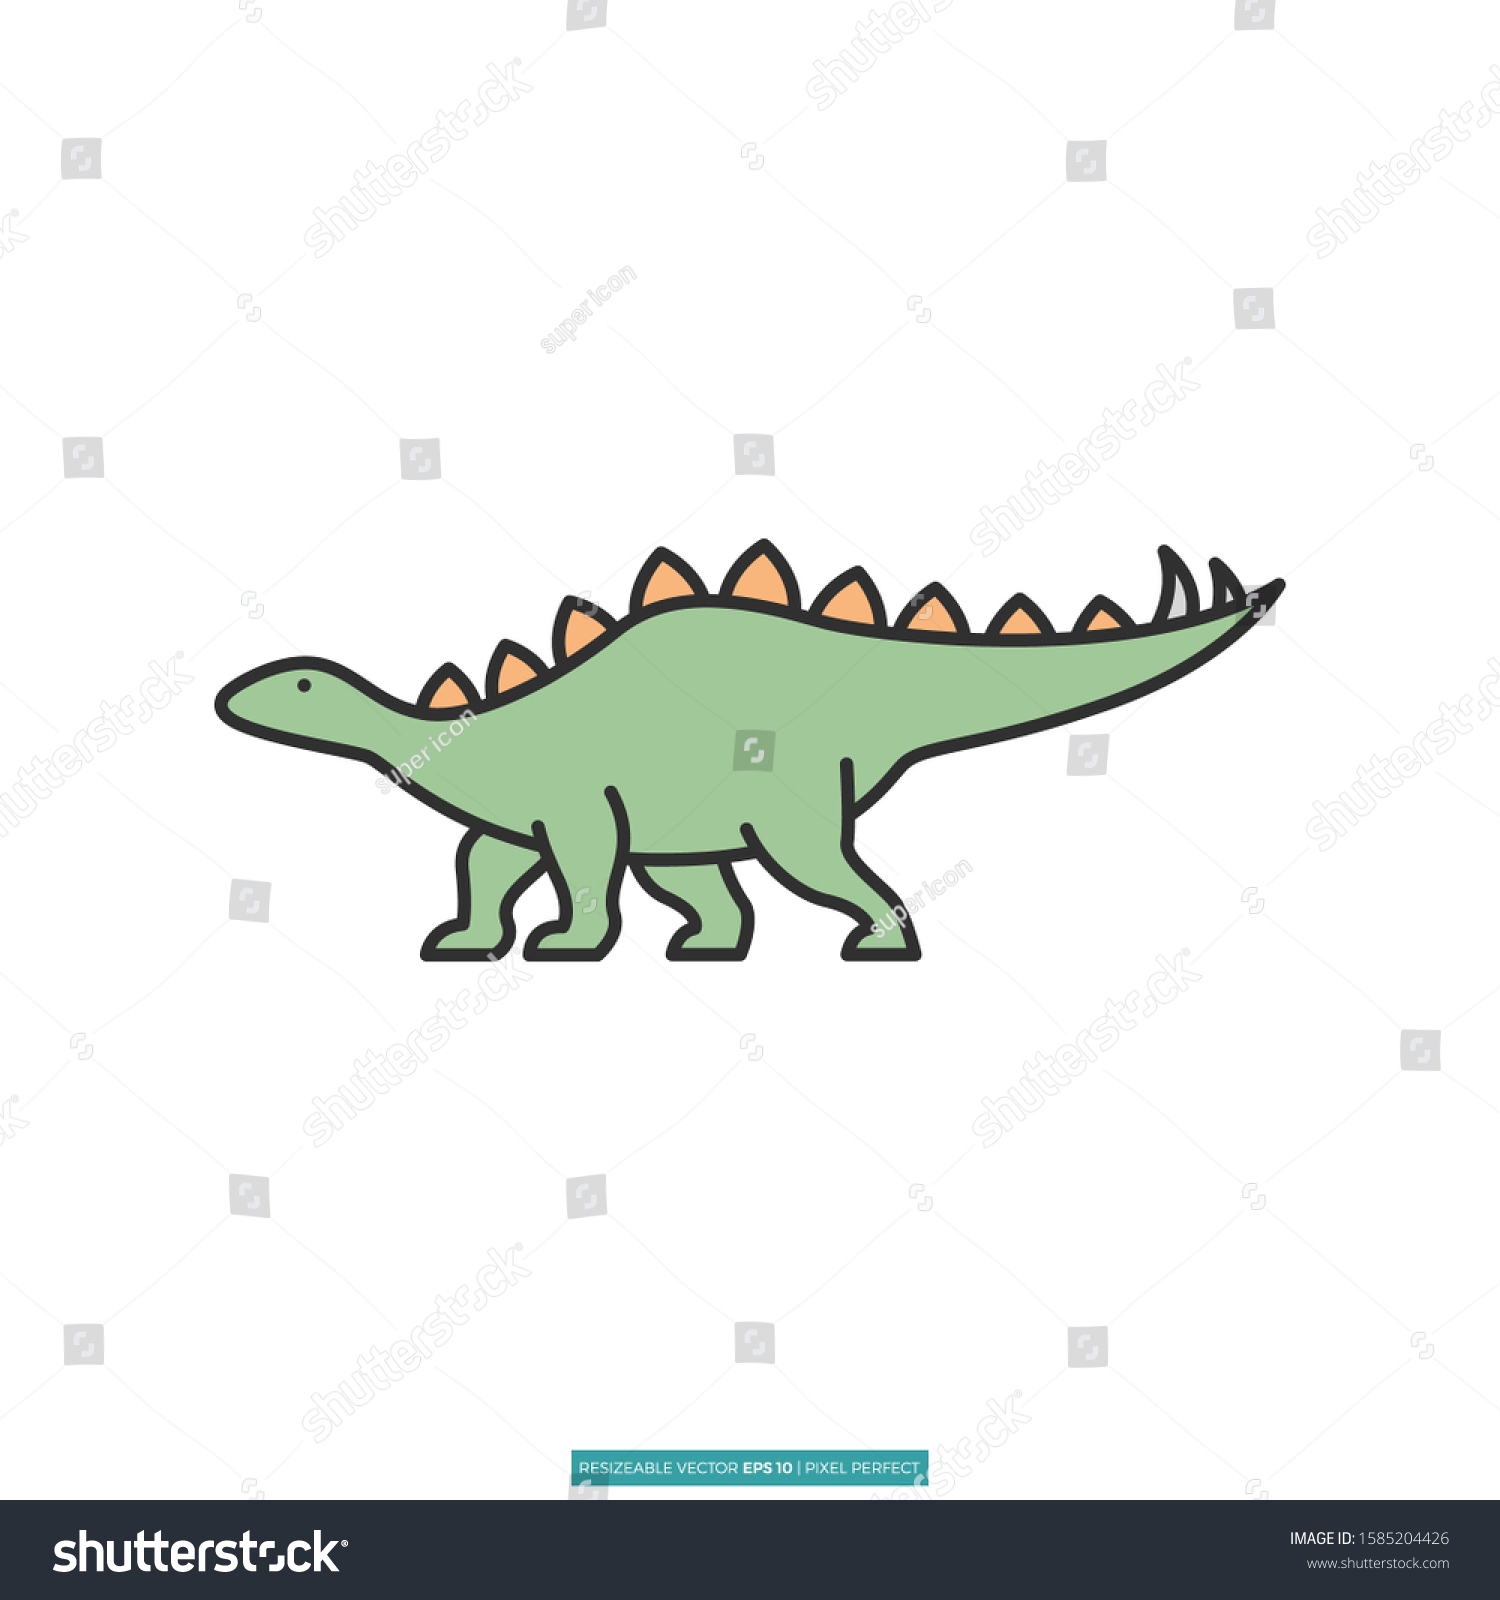 SVG of Stegosaurus icon vector illustration logo template for many purpose. Isolated on white background. svg